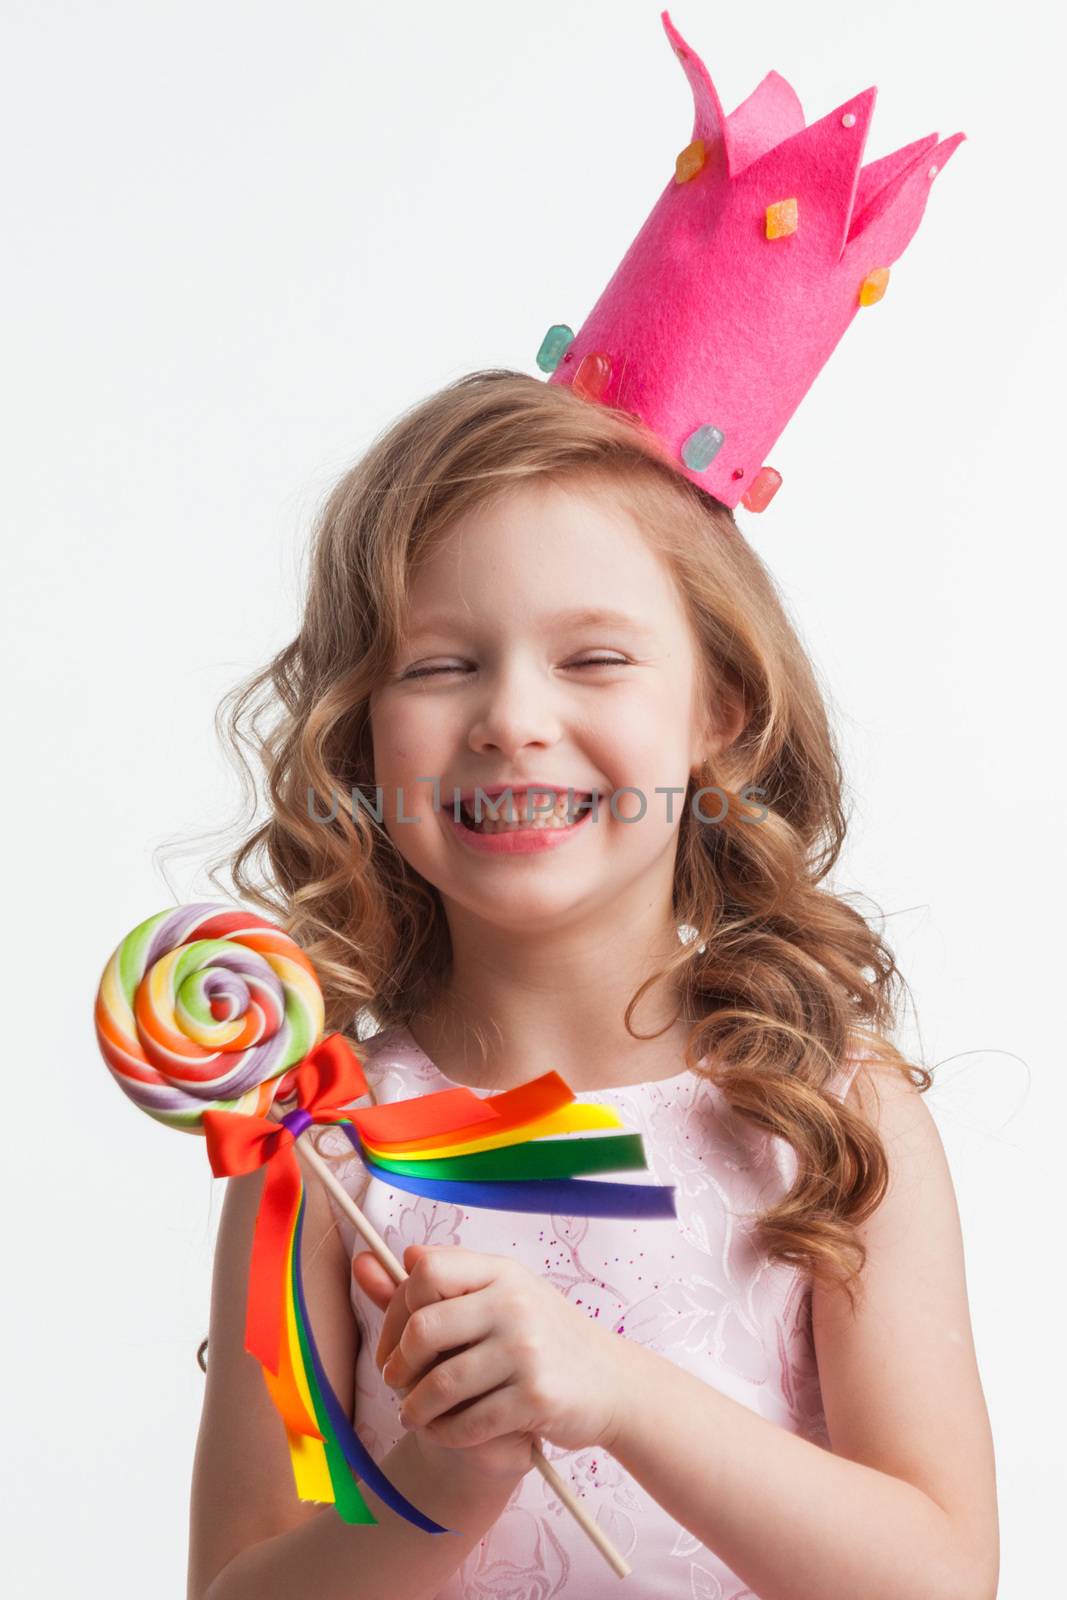 Beautiful little candy princess girl in crown holding big lollipop and laughing